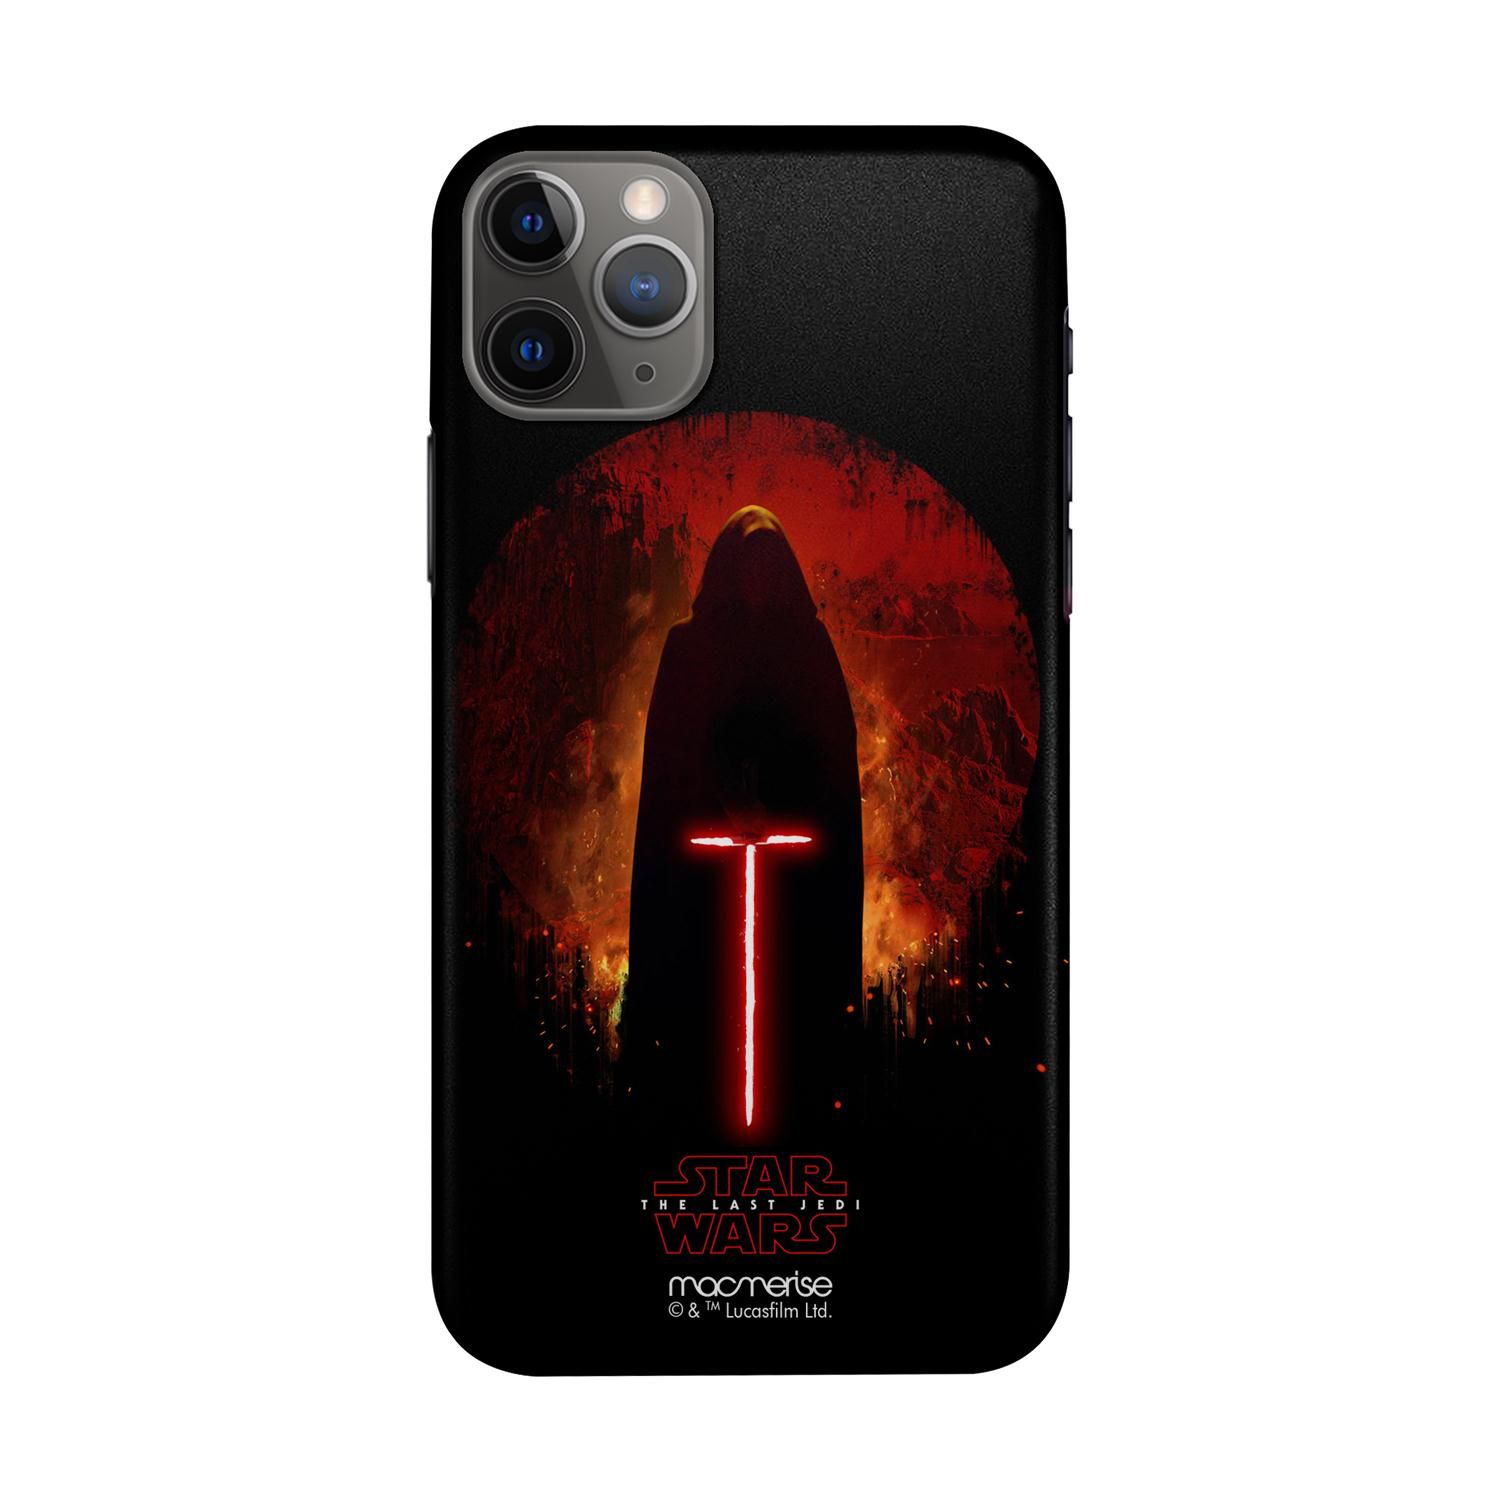 Buy Embrace The Darkness Within - Sleek Phone Case for iPhone 11 Pro Online